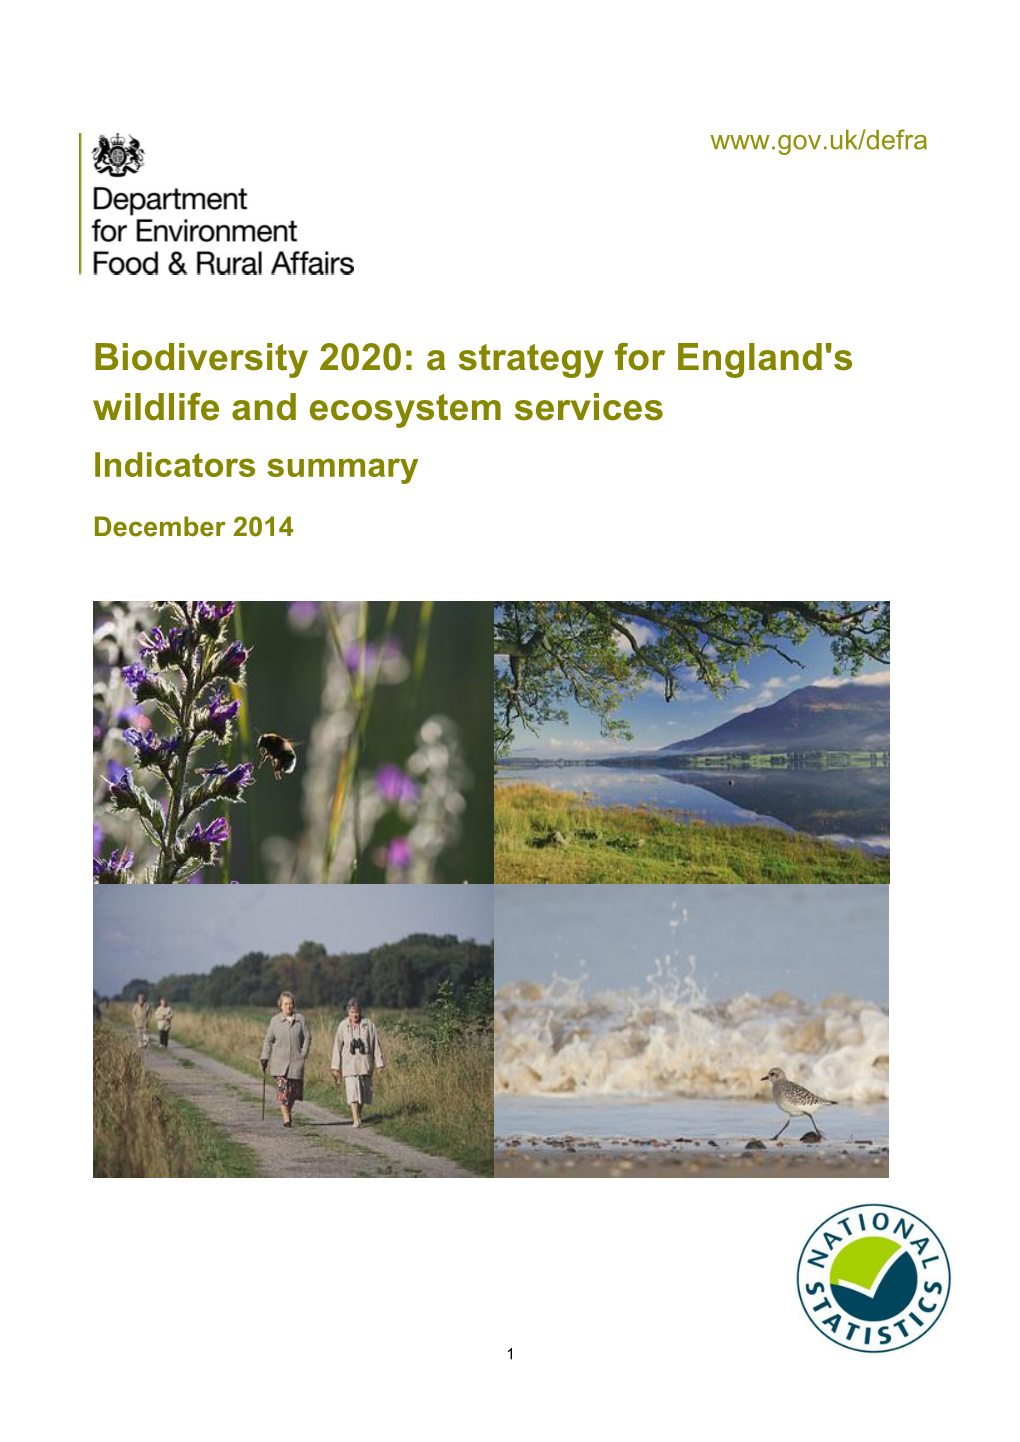 A Strategy for England's Wildlife and Ecosystem Services Indicators Summary